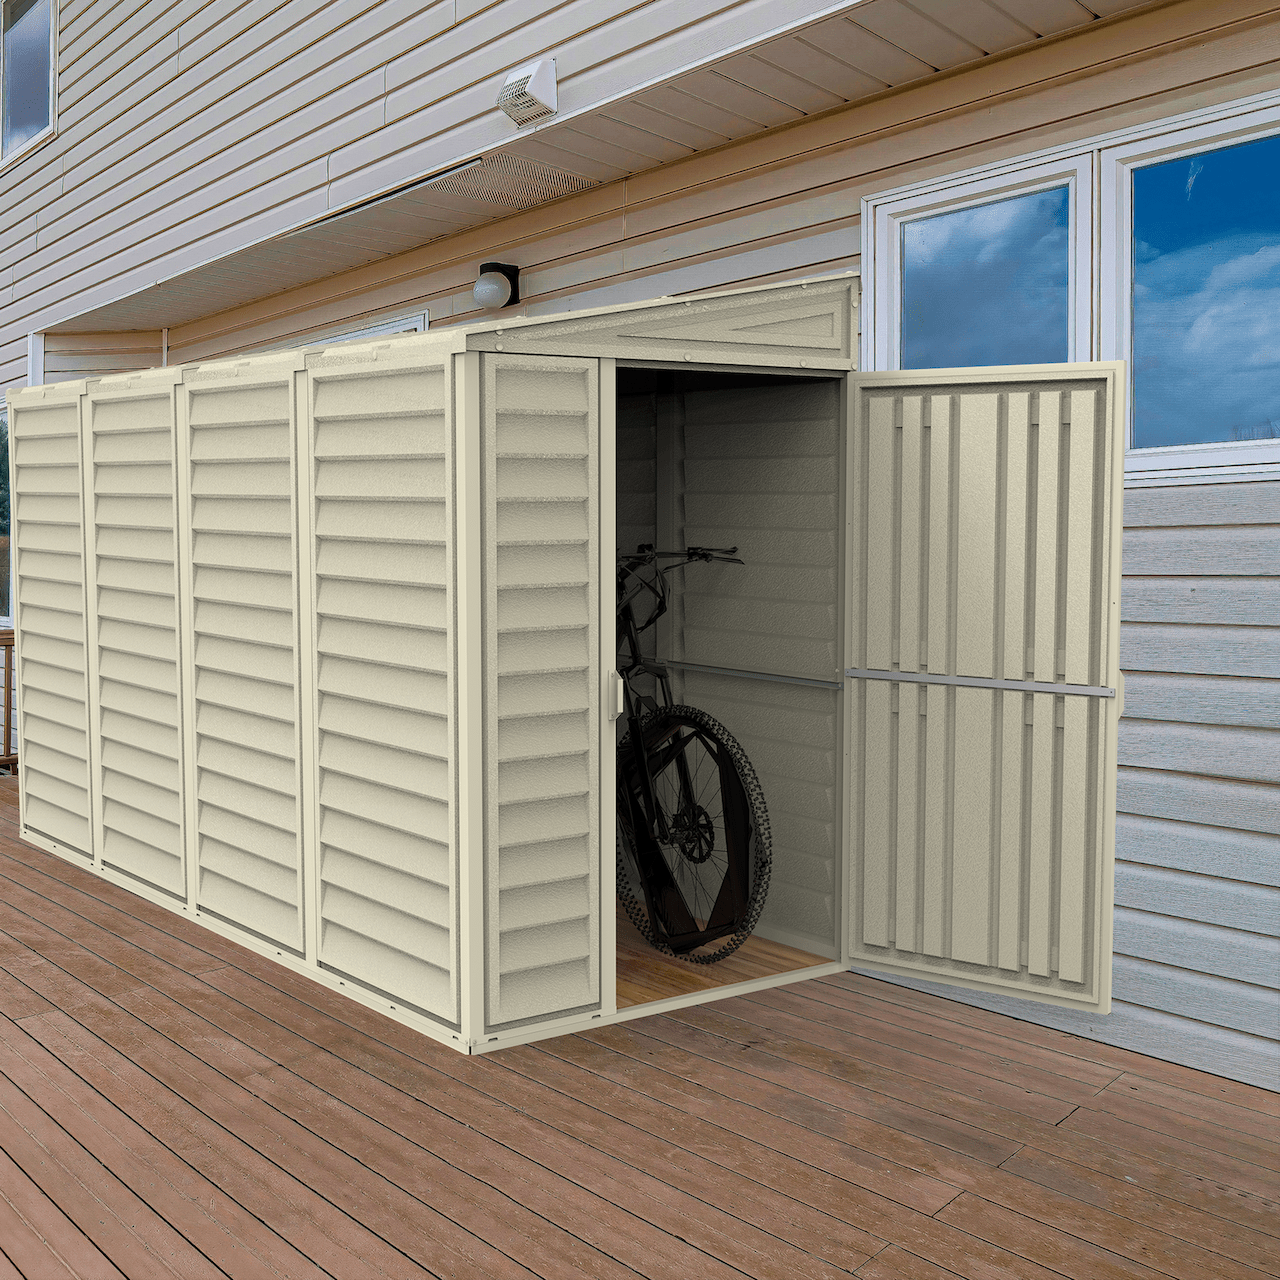 DuraMax Vinyl Shed 4x10 SideMate with Foundation Kit